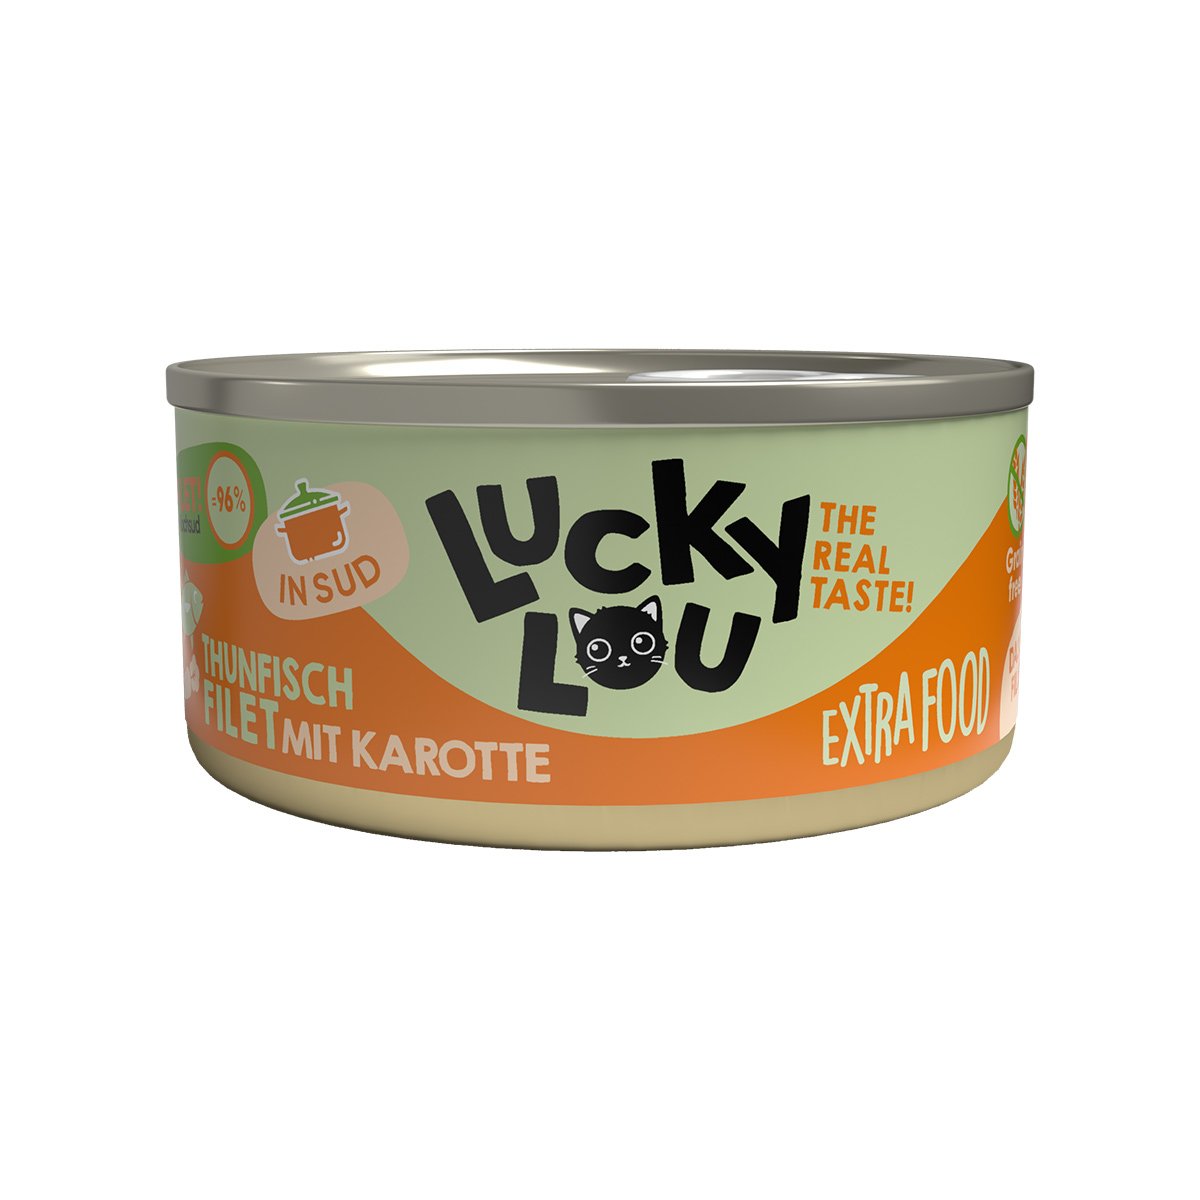 Lucky Lou Extrafood Thunfisch mit Karotte in Sud 18x70g von Lucky Lou